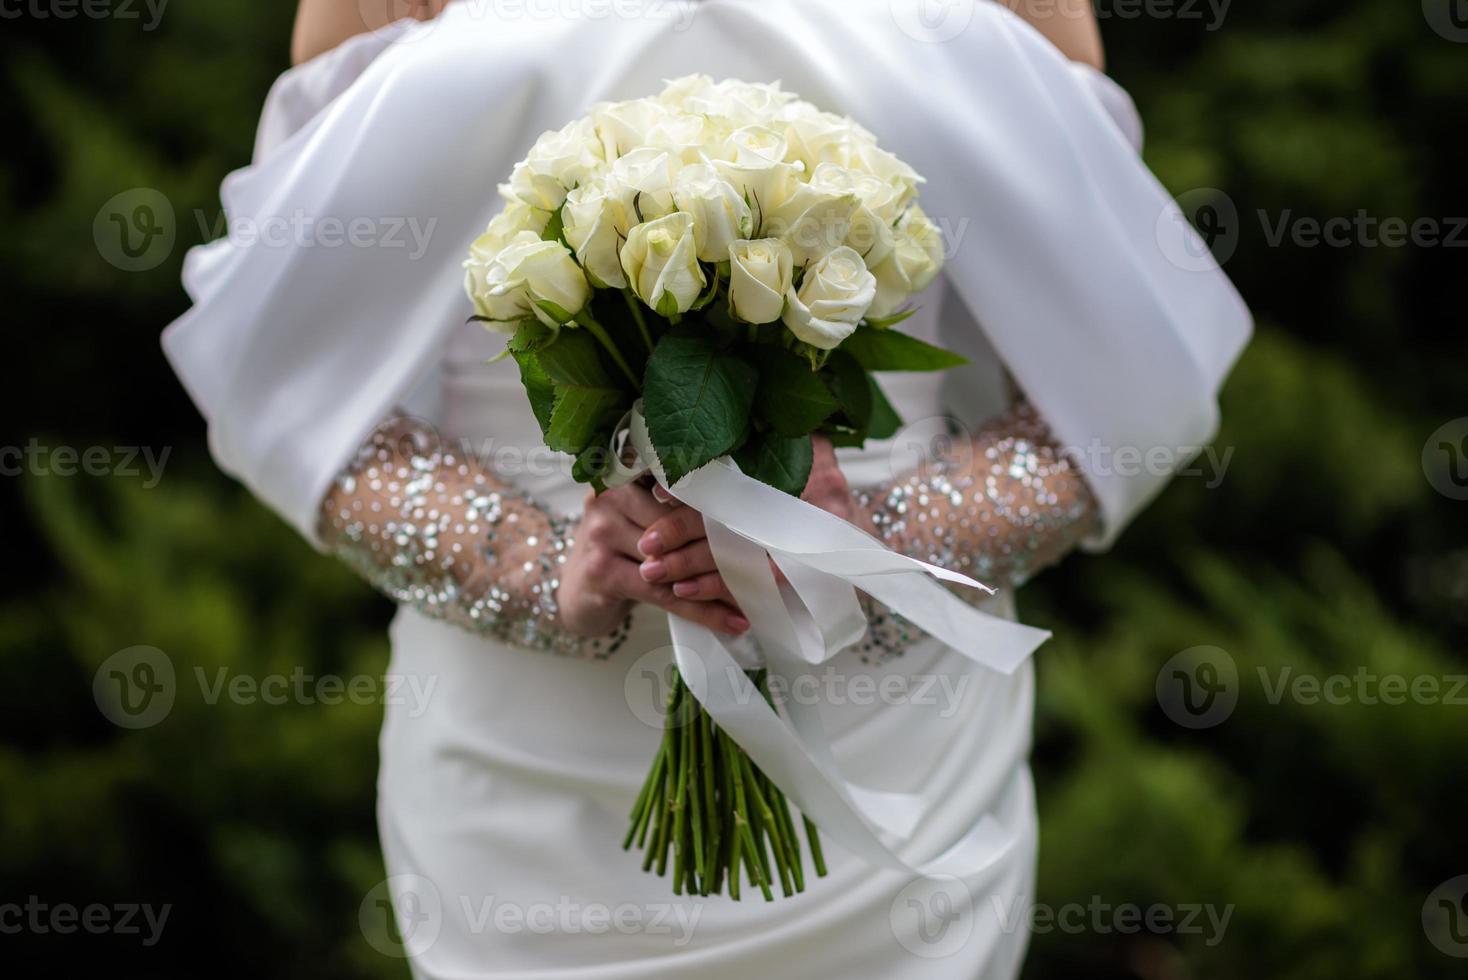 The bride in a white wedding dress is holding a bouquet of white flowers - peonies, roses. Wedding. Bride and groom. Delicate welcome bouquet. Beautiful decoration of weddings with leaves photo